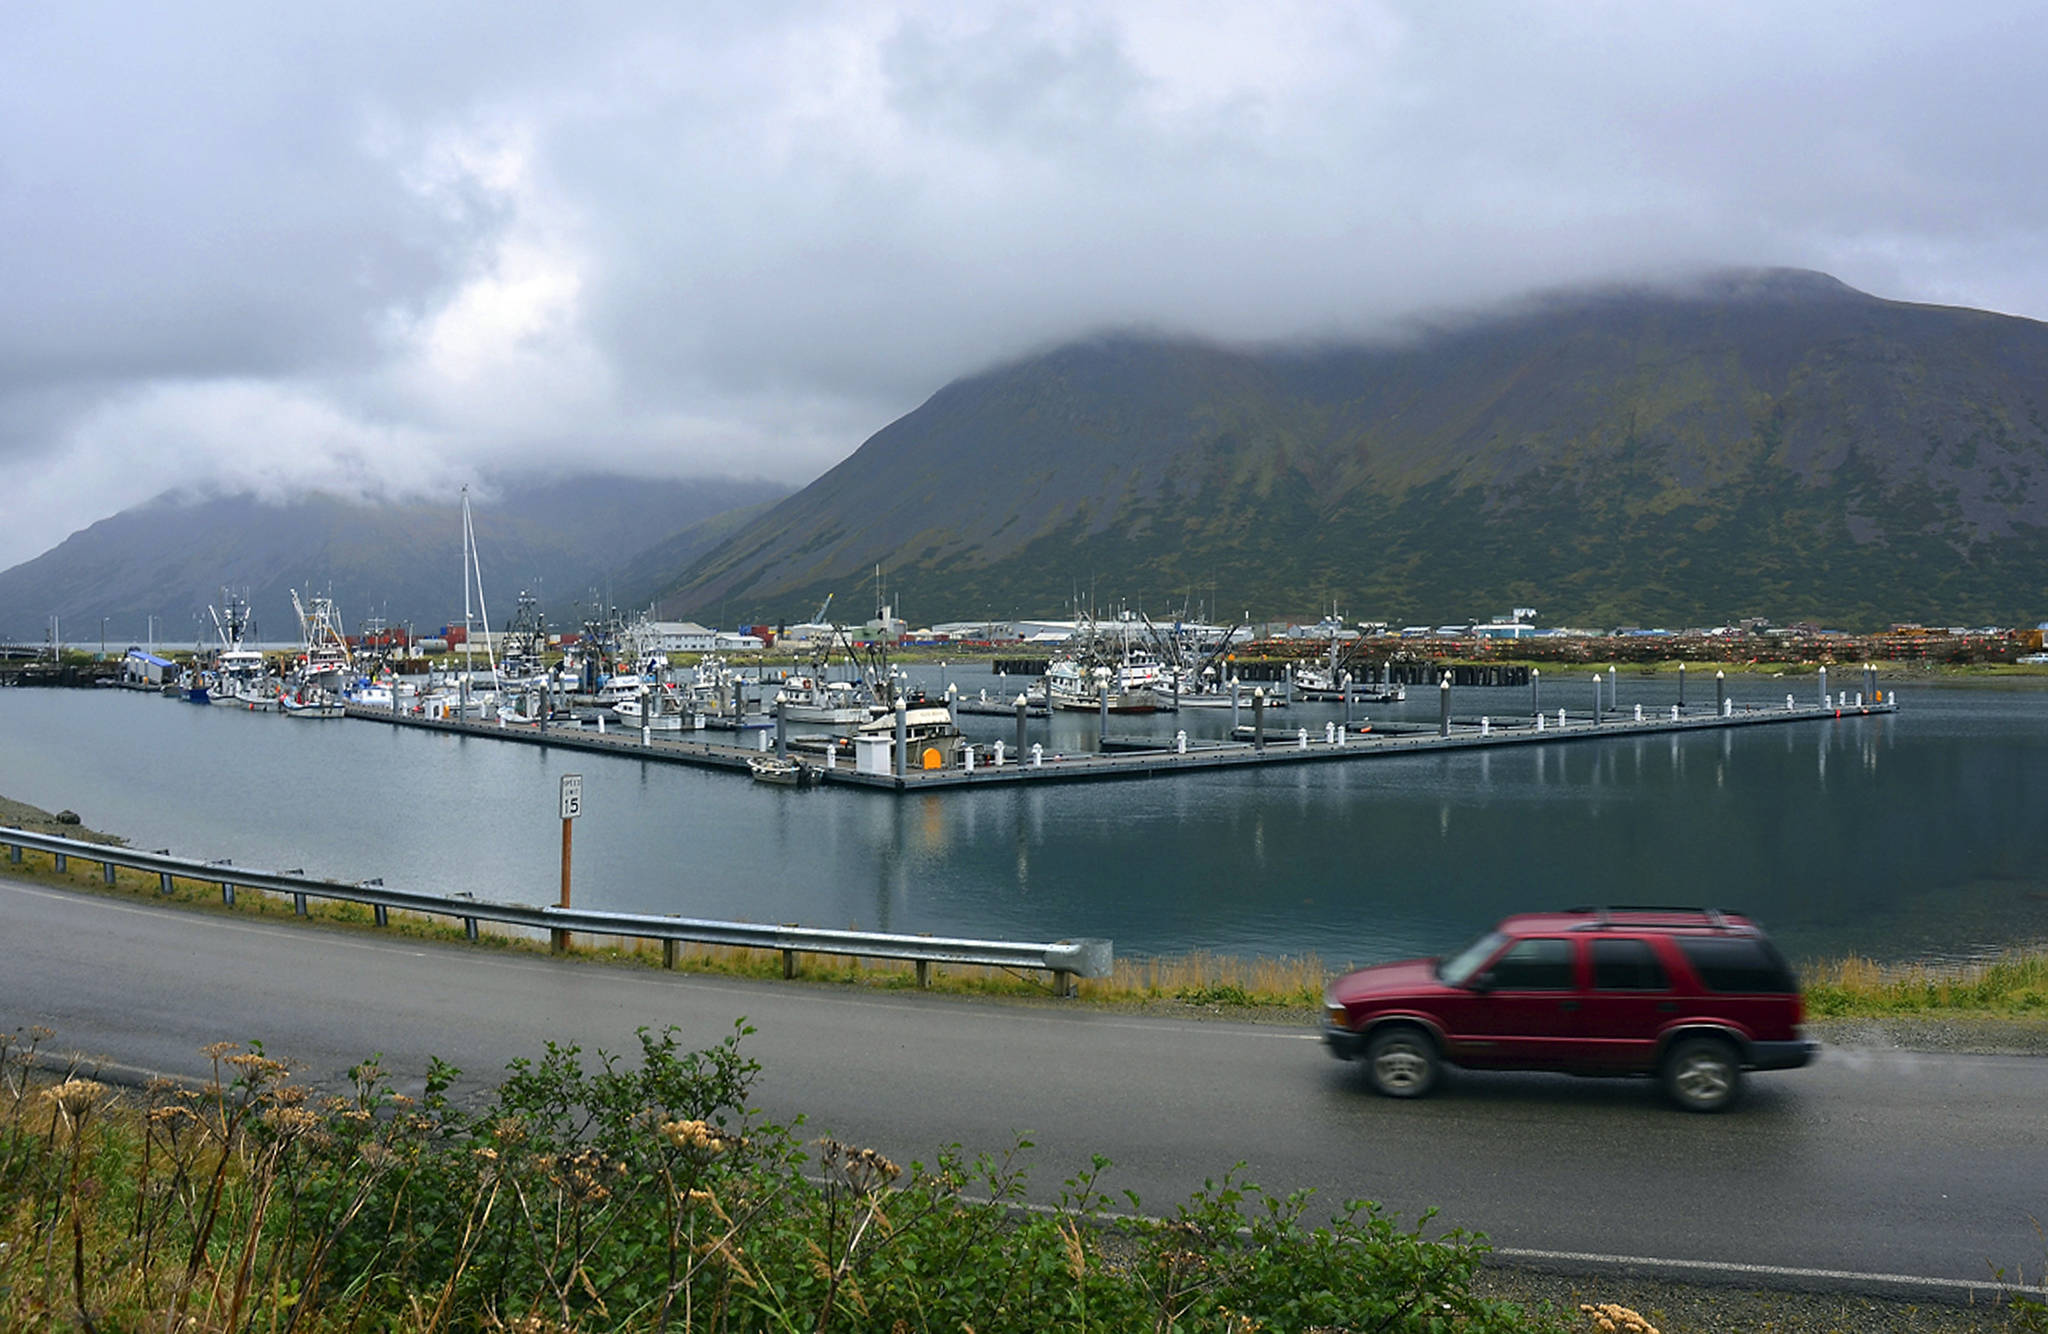 In this Sept. 23, 2013, file photo, a driver passes a small boat harbor in King Cove, Alaska. A federal court judge says Trump administration plans for a road through a national wildlife refuge in Alaska violates federal law. The order Friday, March 29, 2019 by U.S. District Court Judge Sharon Gleason halts plans for a road through the Izembek National Wildlife Refuge near the tip of the Alaska Peninsula. The refuge encompasses internationally recognized habitat for migrating waterfowl. (James Brooks/Kodiak Daily Mirror via AP, File)